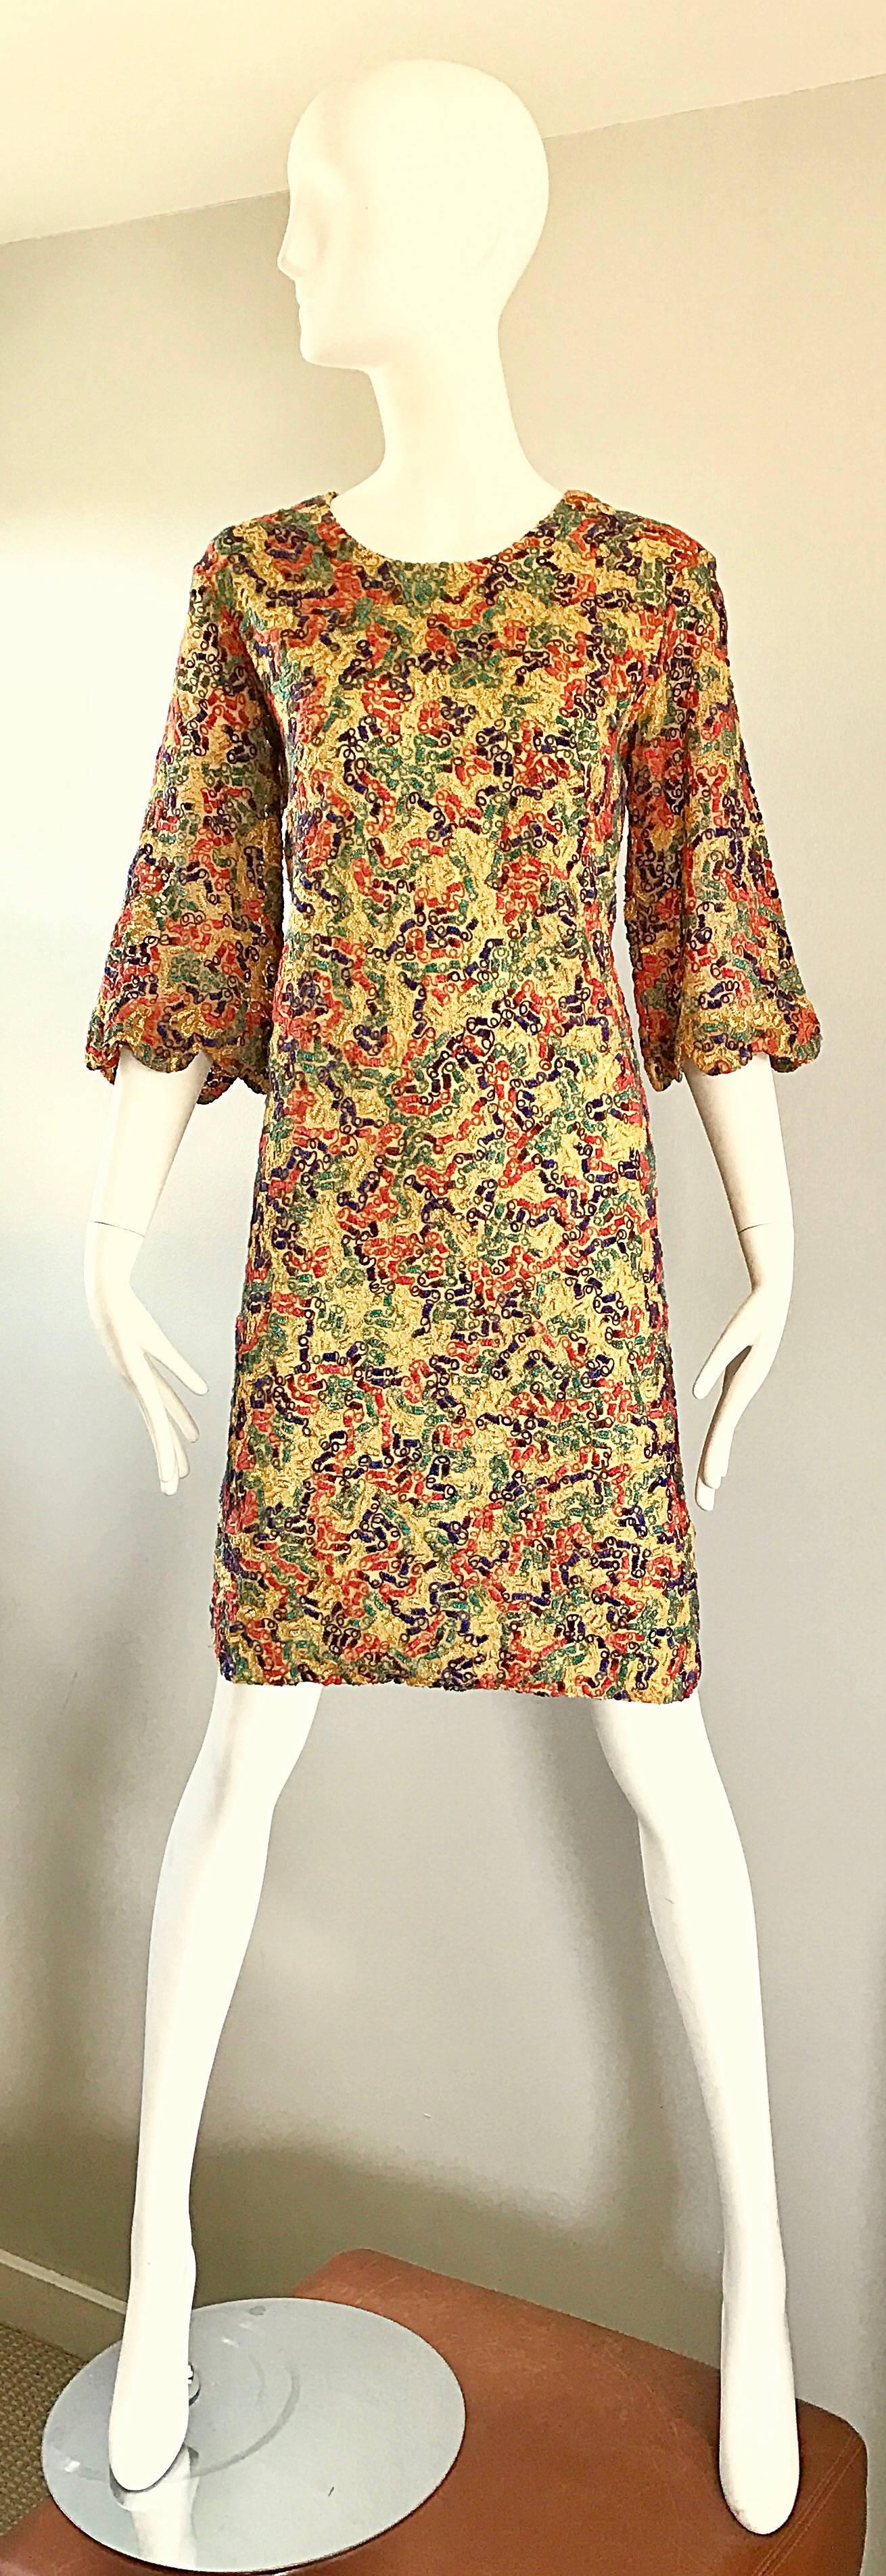 Amazing 1960s colorful shift dress w/ bell sleeves! Features threading throughout in vibrant hues of green, red, yellow, and blue throughout, with a marigold base. Scalloped 3/4 bell sleeves. Amazing quality, with lots of attention to detail. Zips